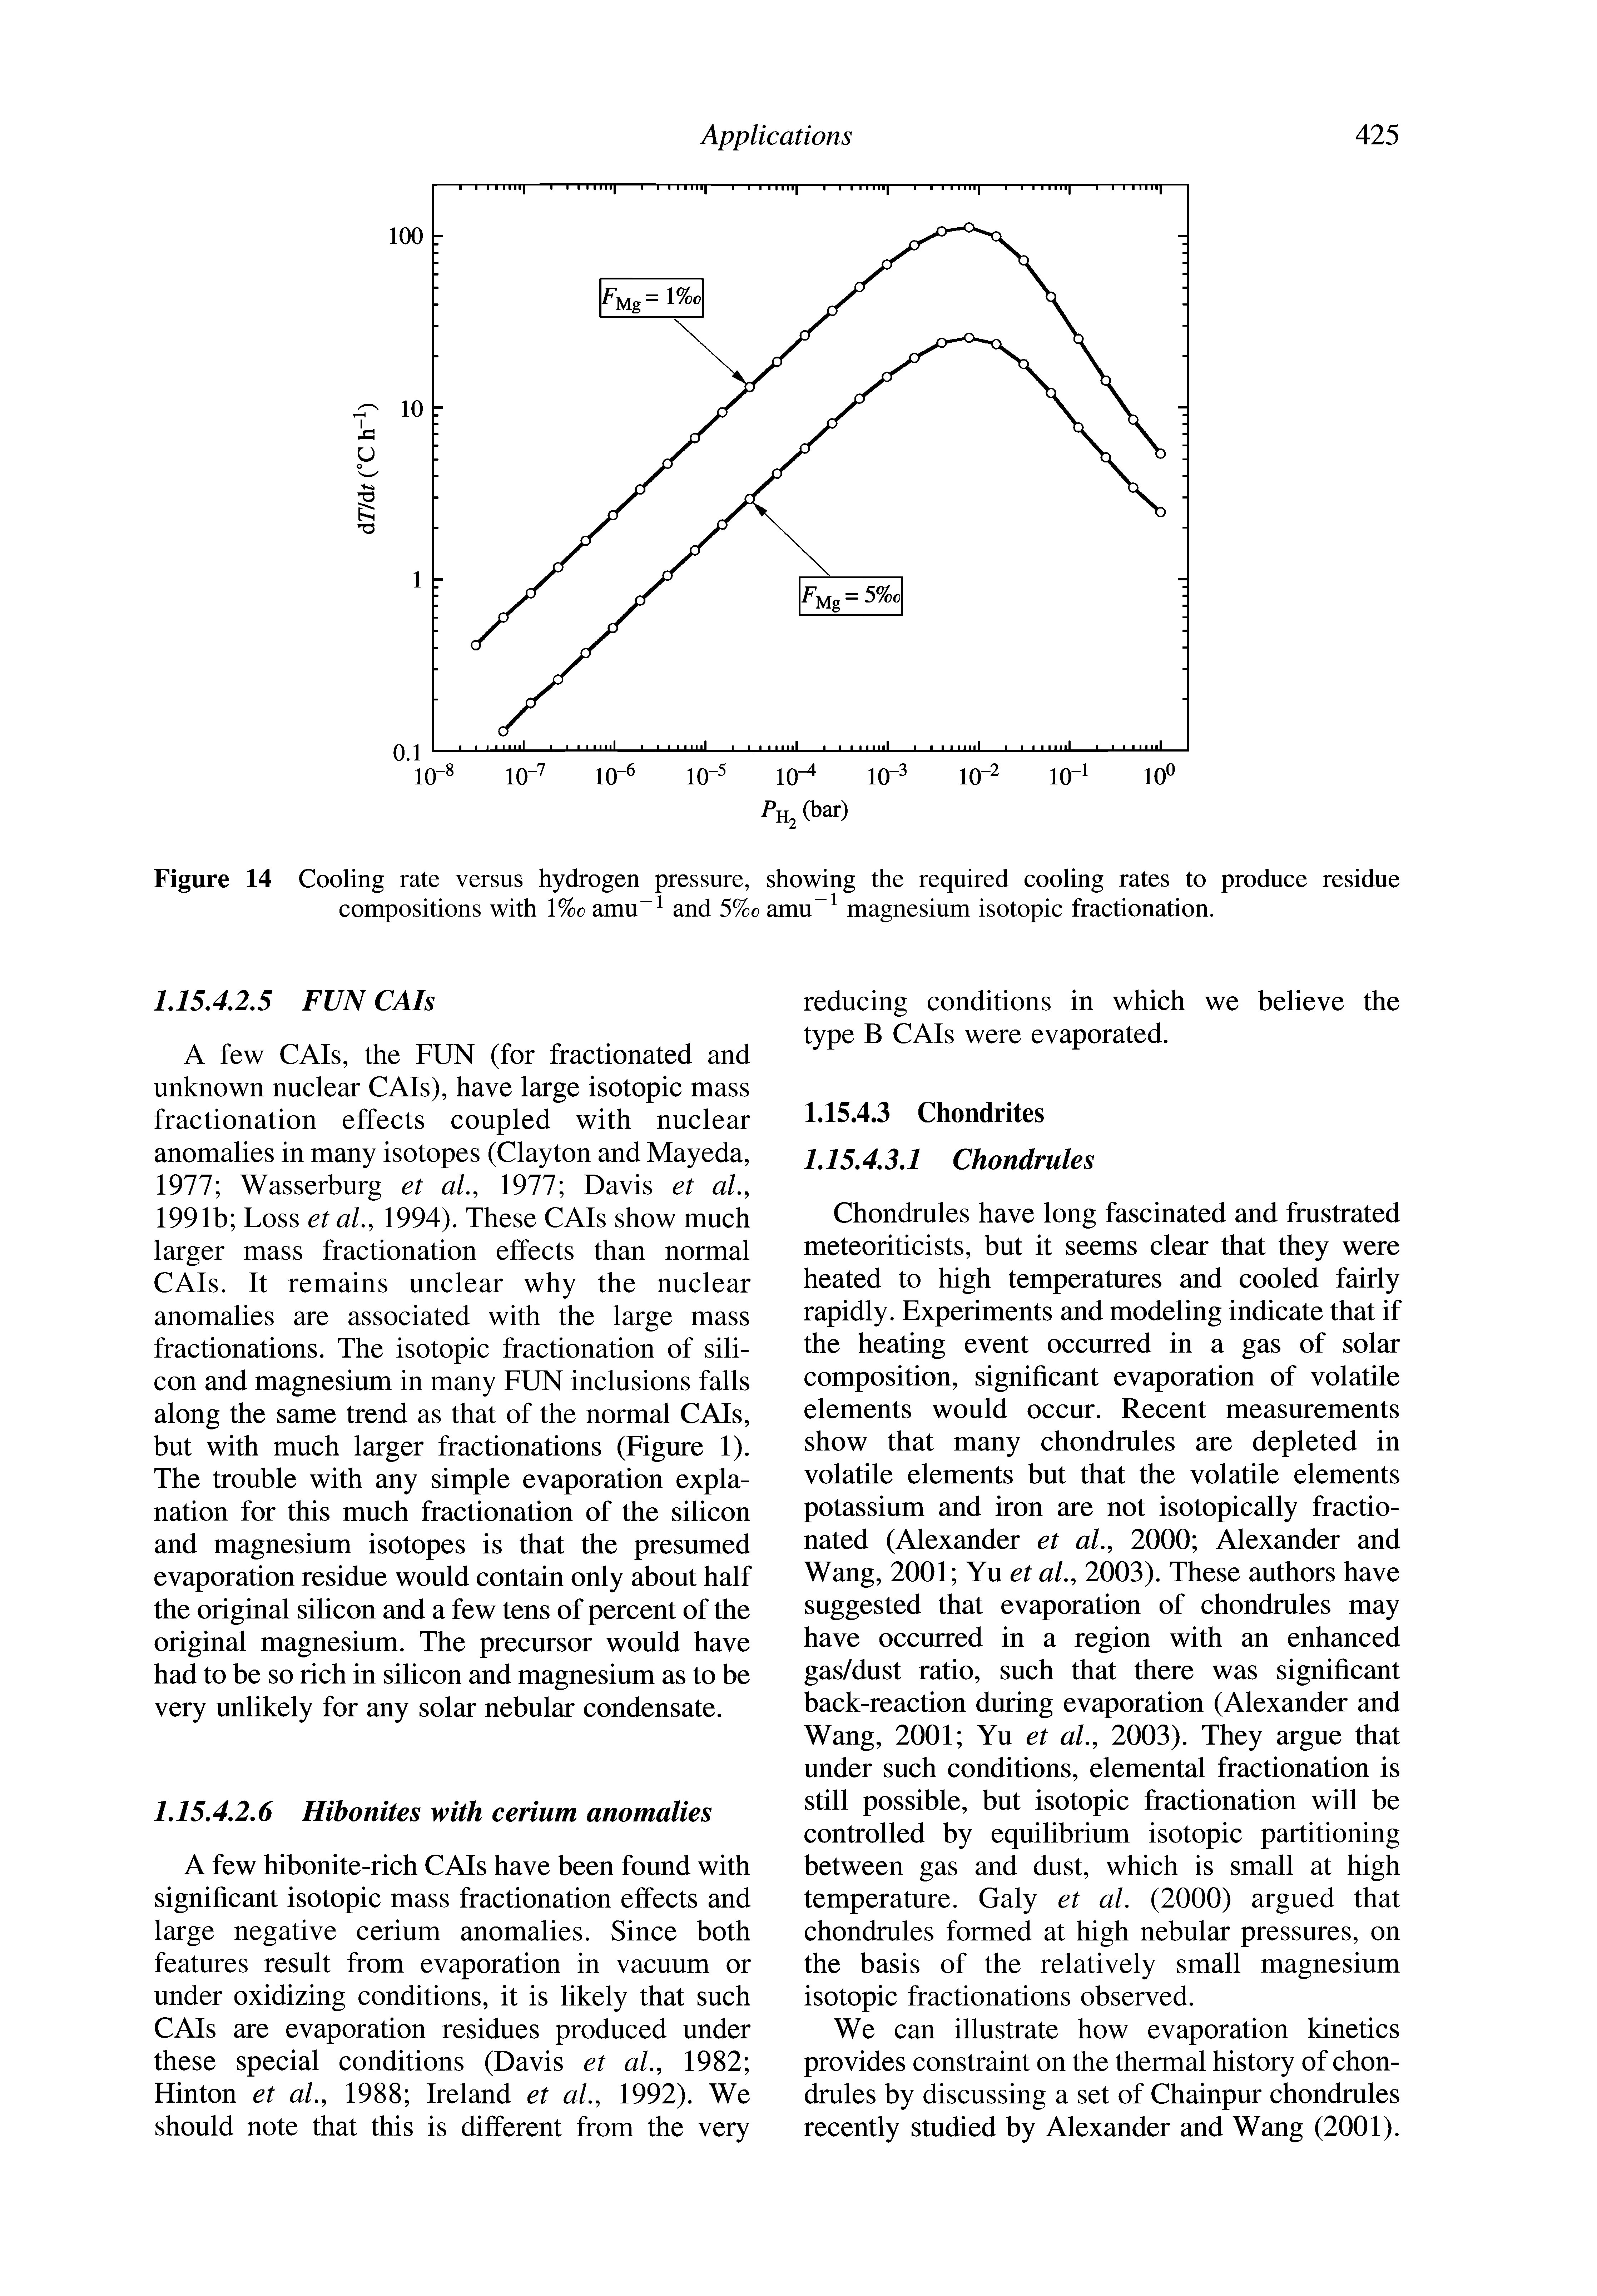 Figure 14 Cooling rate versus hydrogen pressure, showing the required cooling rates to produce residue compositions with %c amu and 5%c amu magnesium isotopic fractionation.